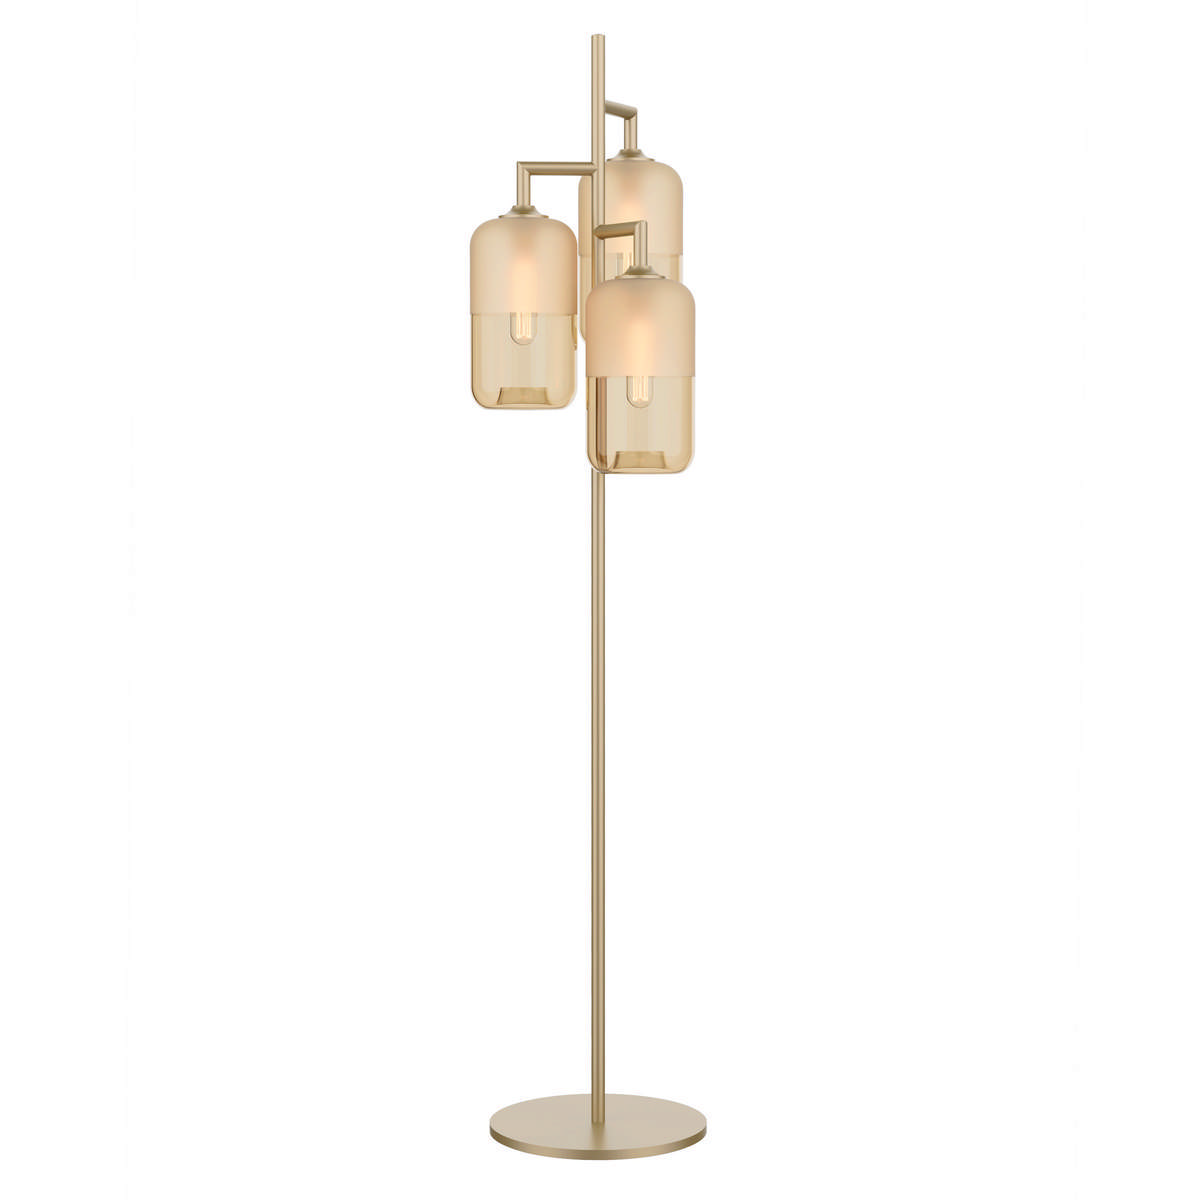 By Eve Eve Stand Down 3 Staande lamp Collectie 2